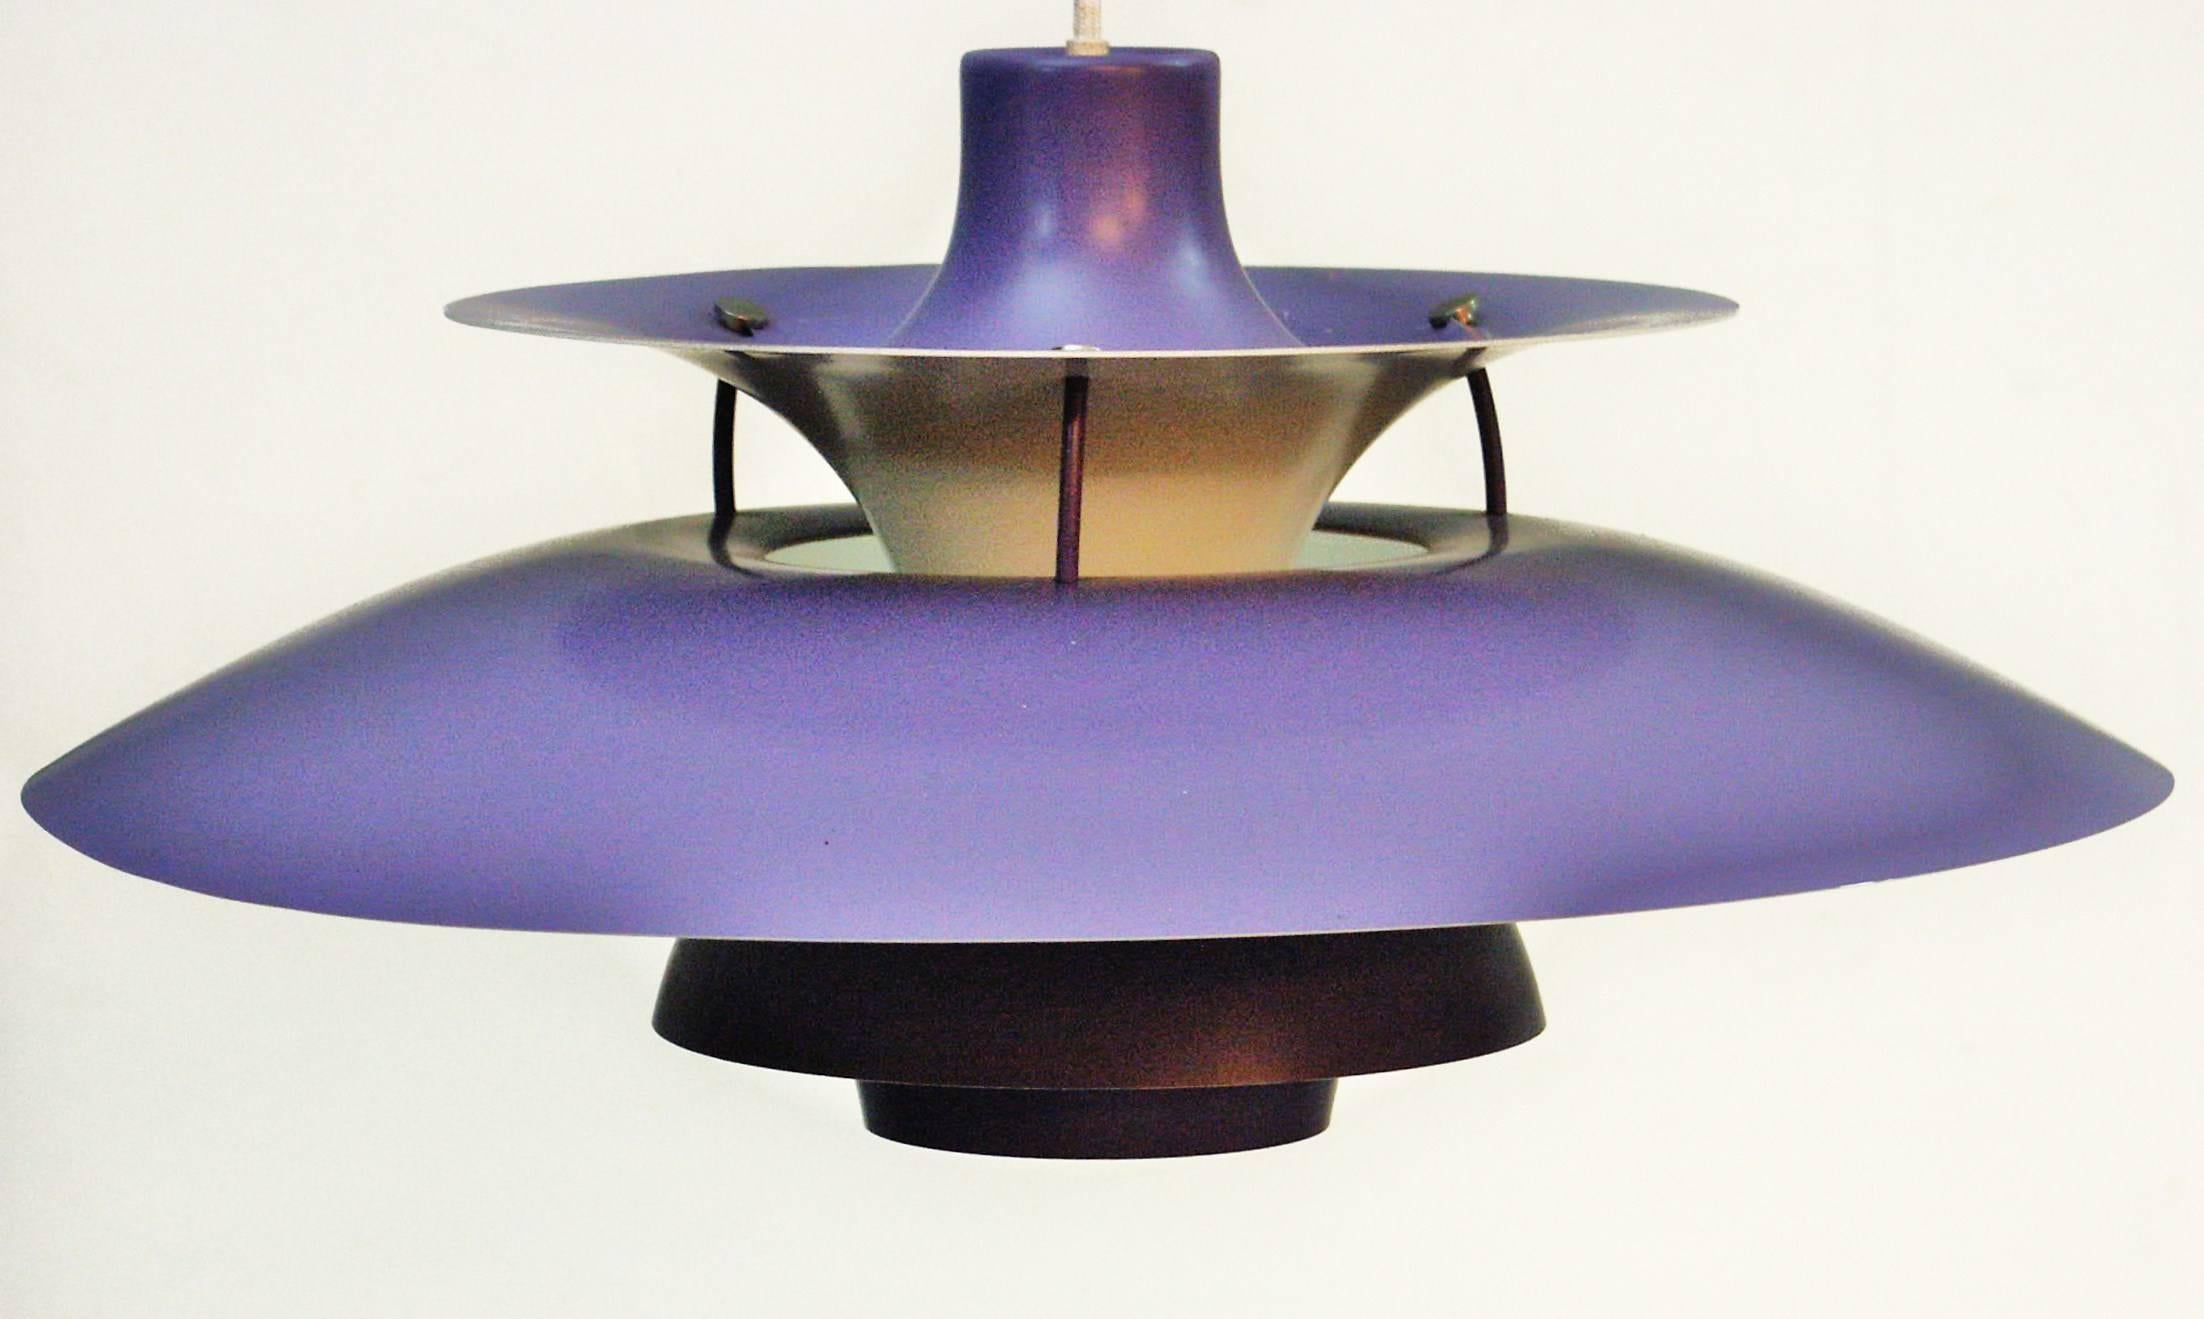 The Lamp was designed by Poul Henningsen for Louis Poulsen in the 1958.
Designed to hang low over the table, they create a 100% glare-free light
these pendants have purple band details on the underside and orange bands 
on the upper tier, which